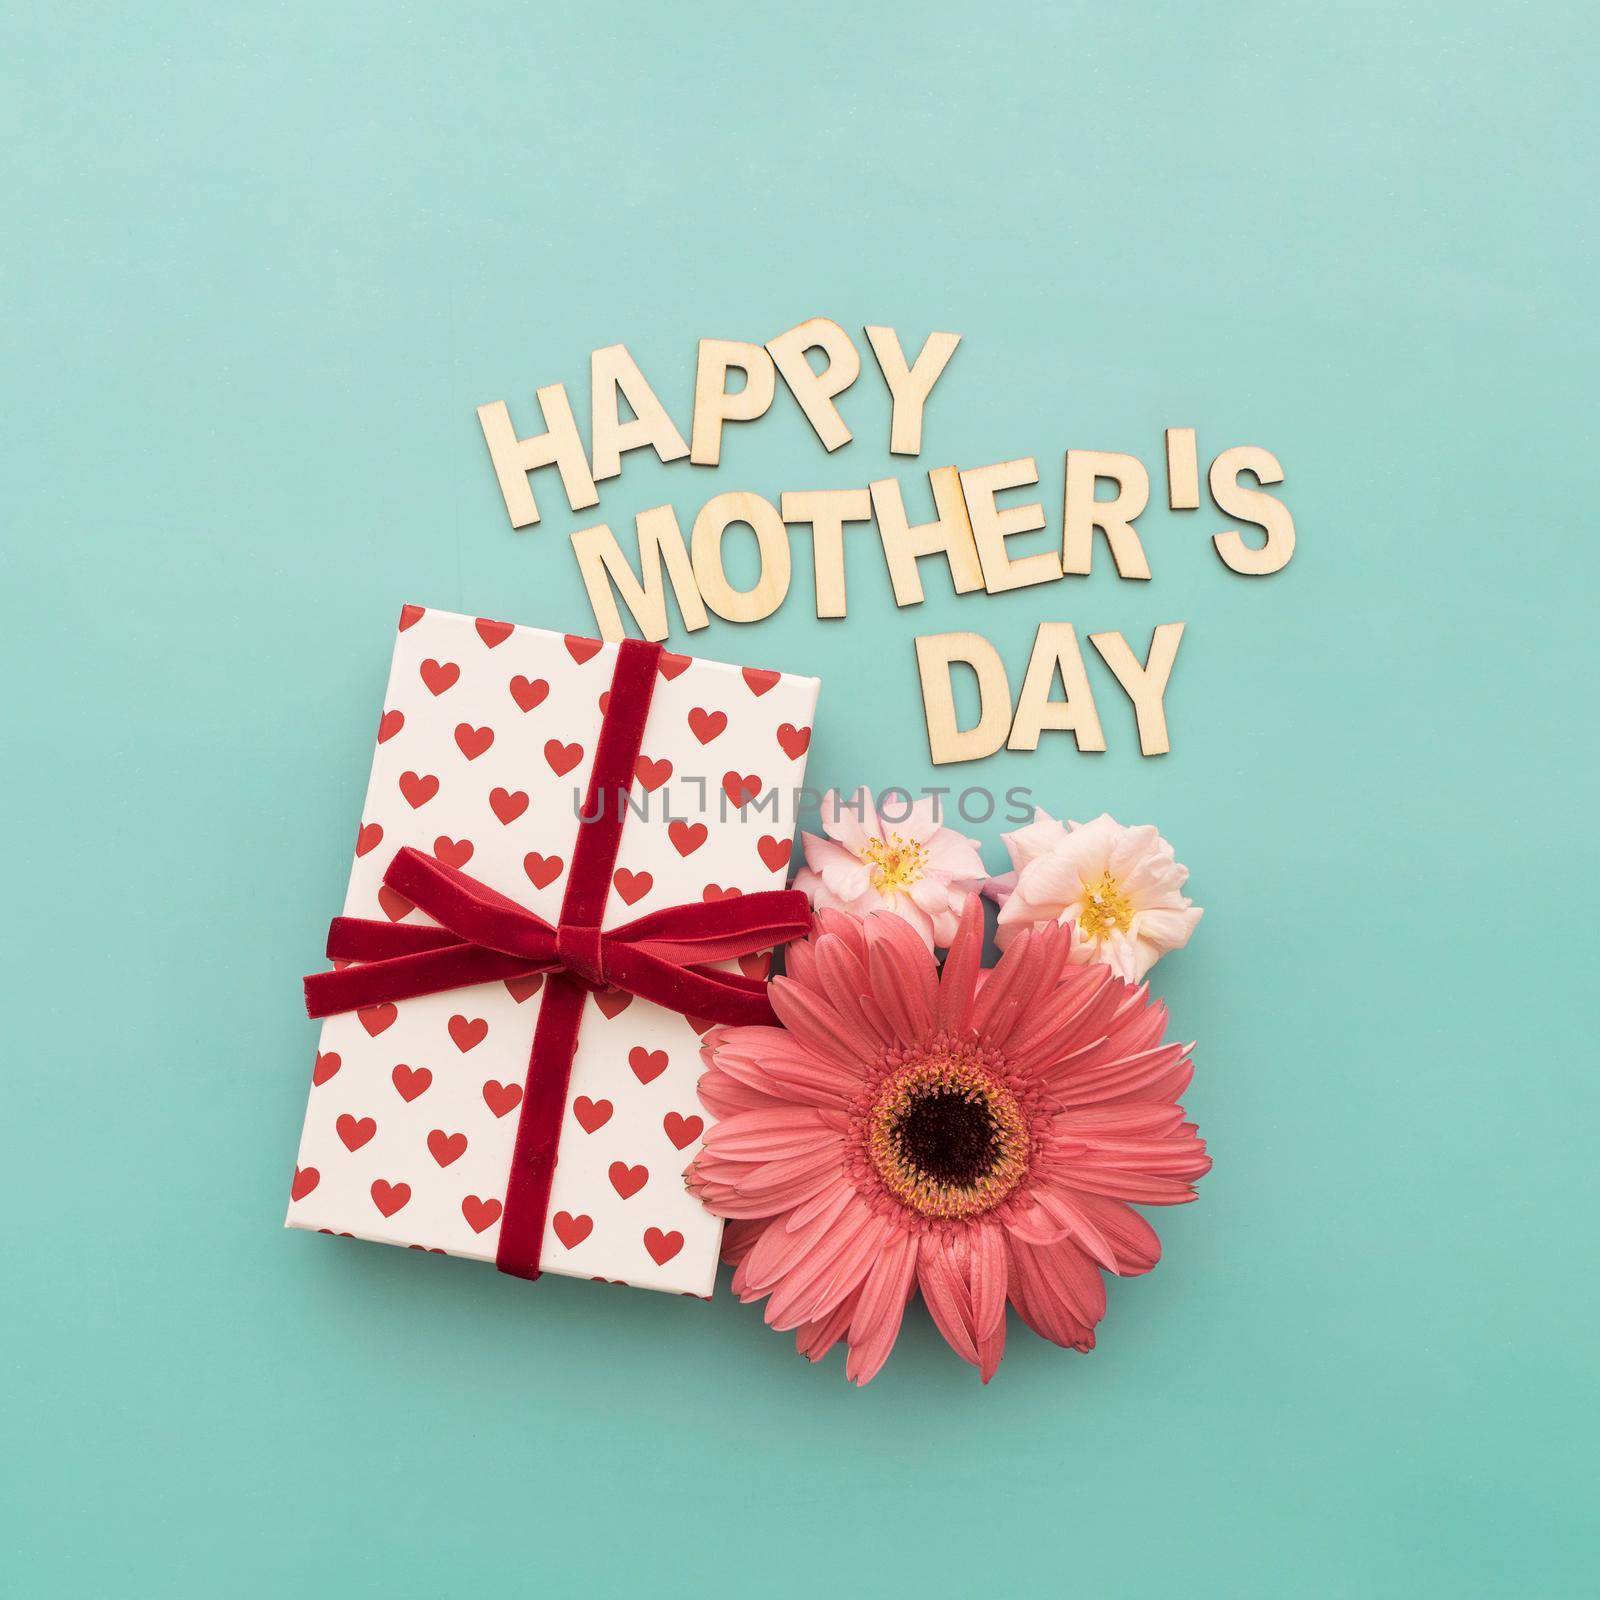 happy mother s day lettering gift box flowers close up. High quality beautiful photo concept by Zahard